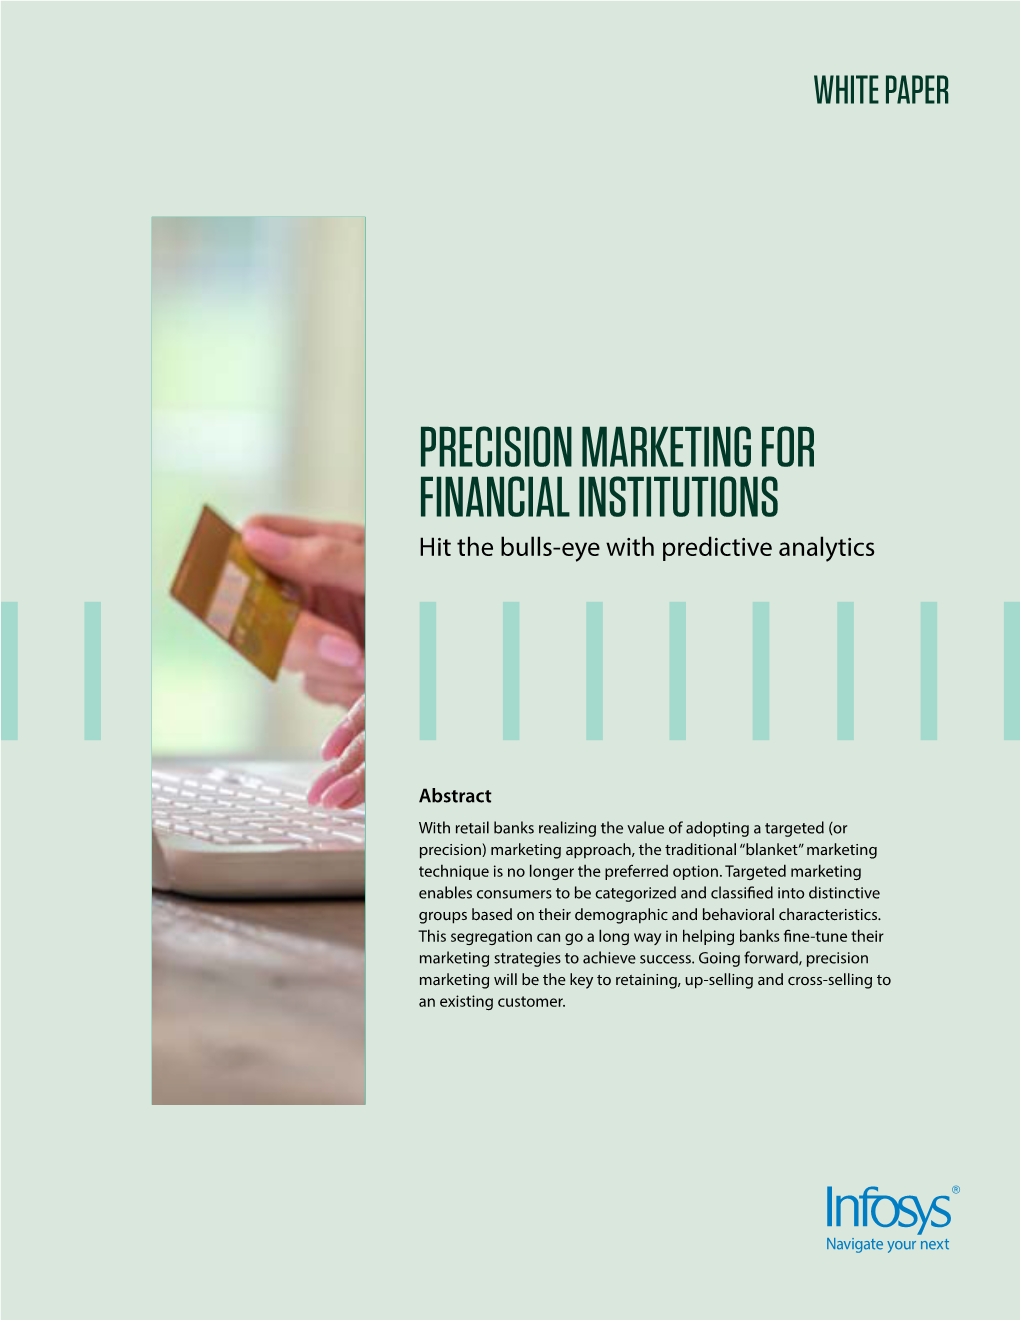 PRECISION MARKETING for FINANCIAL INSTITUTIONS Hit the Bulls-Eye with Predictive Analytics